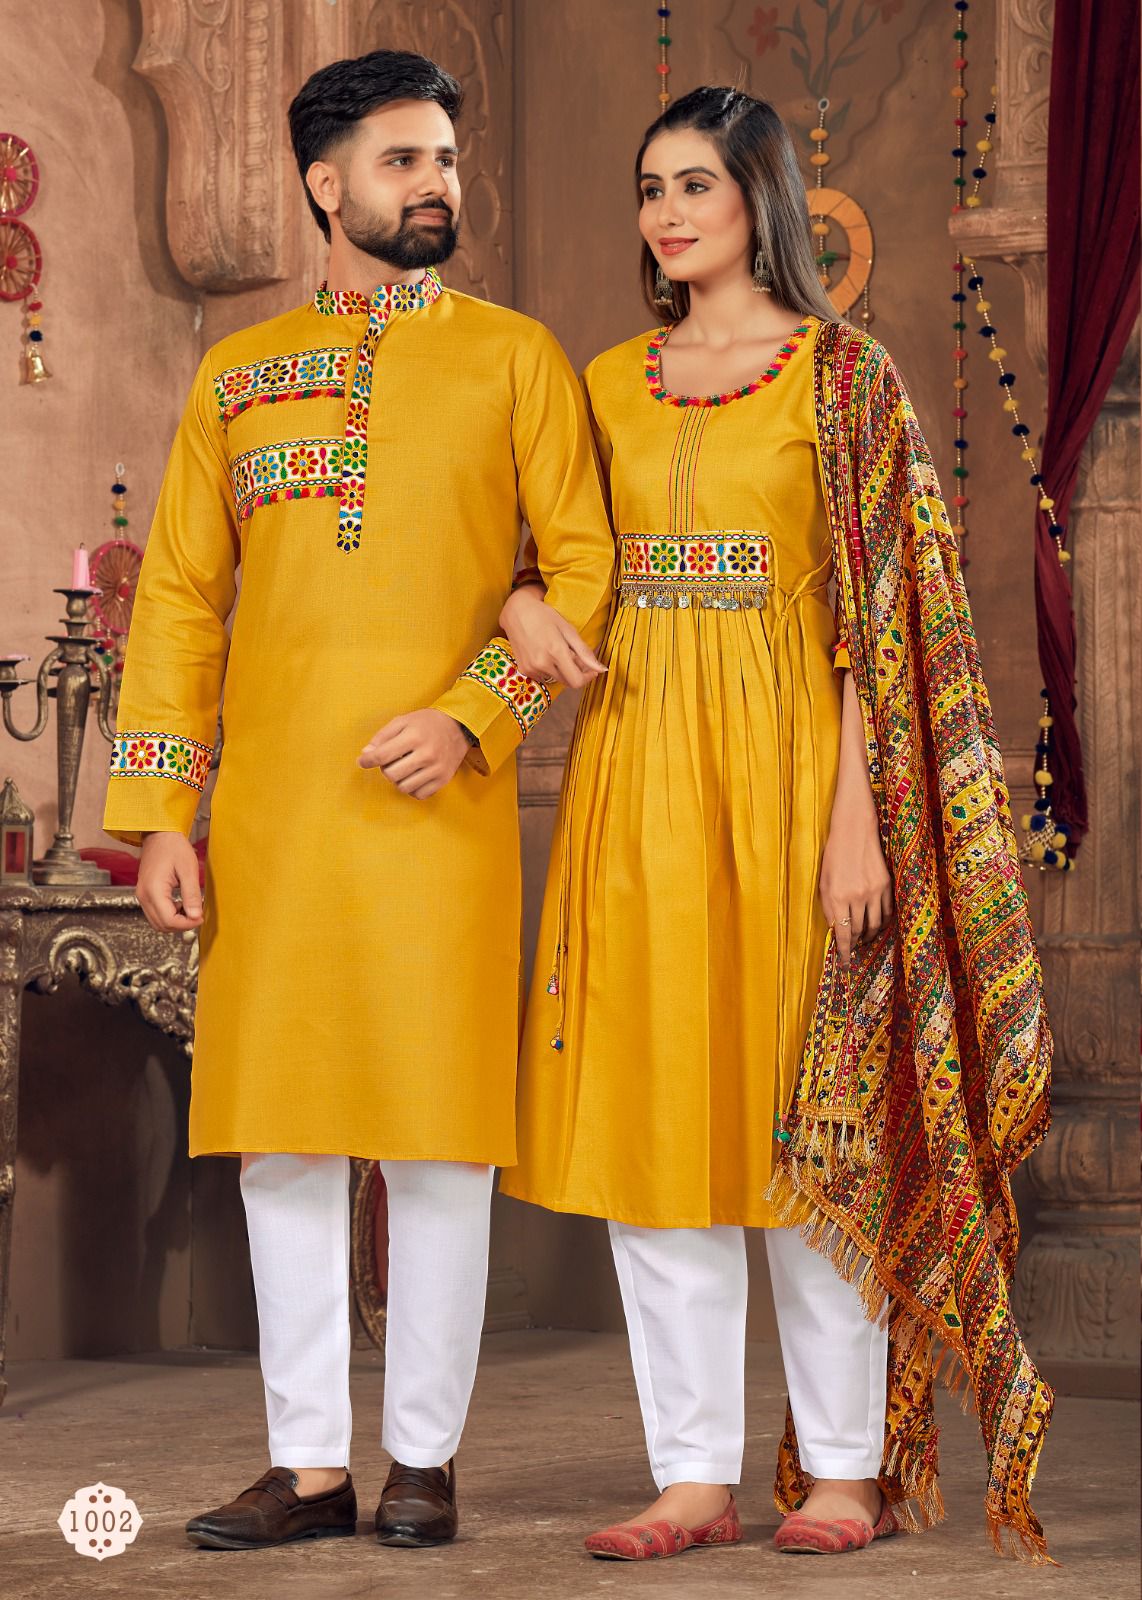 Buy NAVRATRI TWINNING - WHITE COTTON EMBROIDERED COUPLE COMBO at INR 1300  online from Inli Exports kurta kurti couple combo : navratritwinning-white